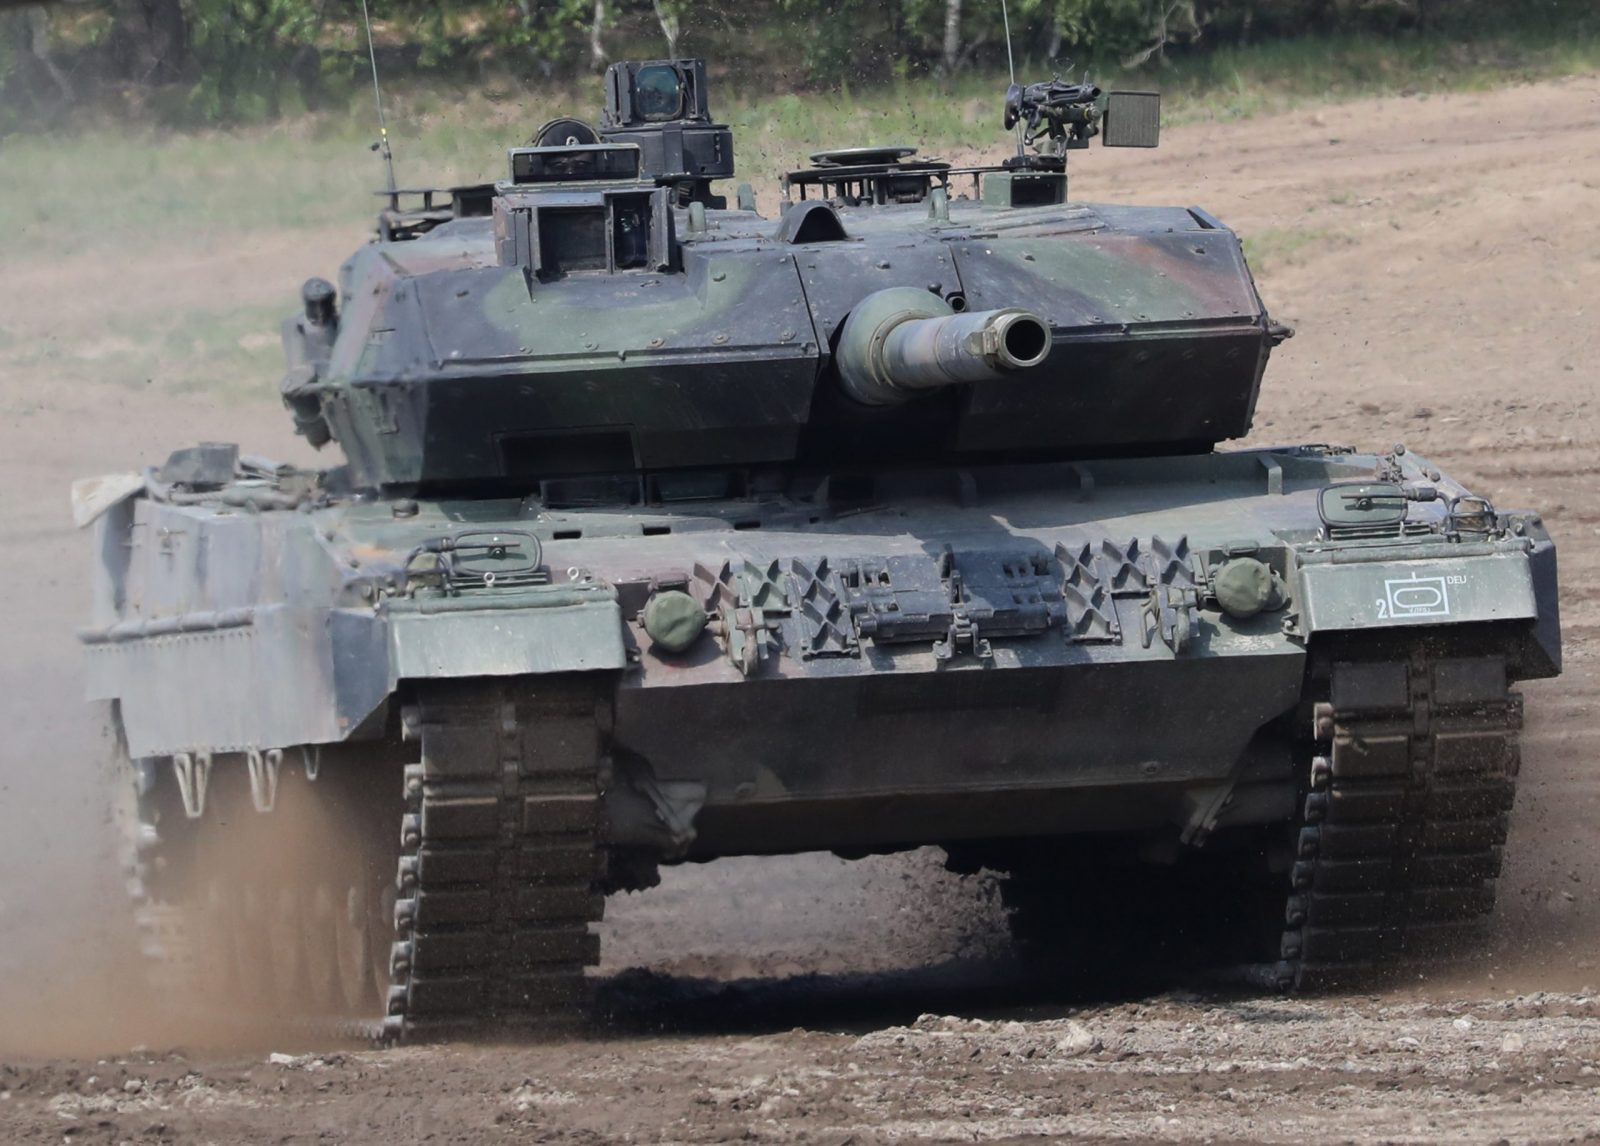 epa10427153 (FILE) - A German Army 'Leopard 2' tank during the NATO Very High Readiness Task Force Land (VJTF L 2019) exercise in Muenster, northern Germany, 20 May 2019 (reissued 24 January 2023). German Chancellor Olaf Scholz has decided to send Leopard 2 tanks to Ukraine and allow other countries such as Poland to do so while the US may supply Abrams tanks, German media has reported 24 January 2023.  EPA/FOCKE STRANGMANN *** Local Caption *** 55209013